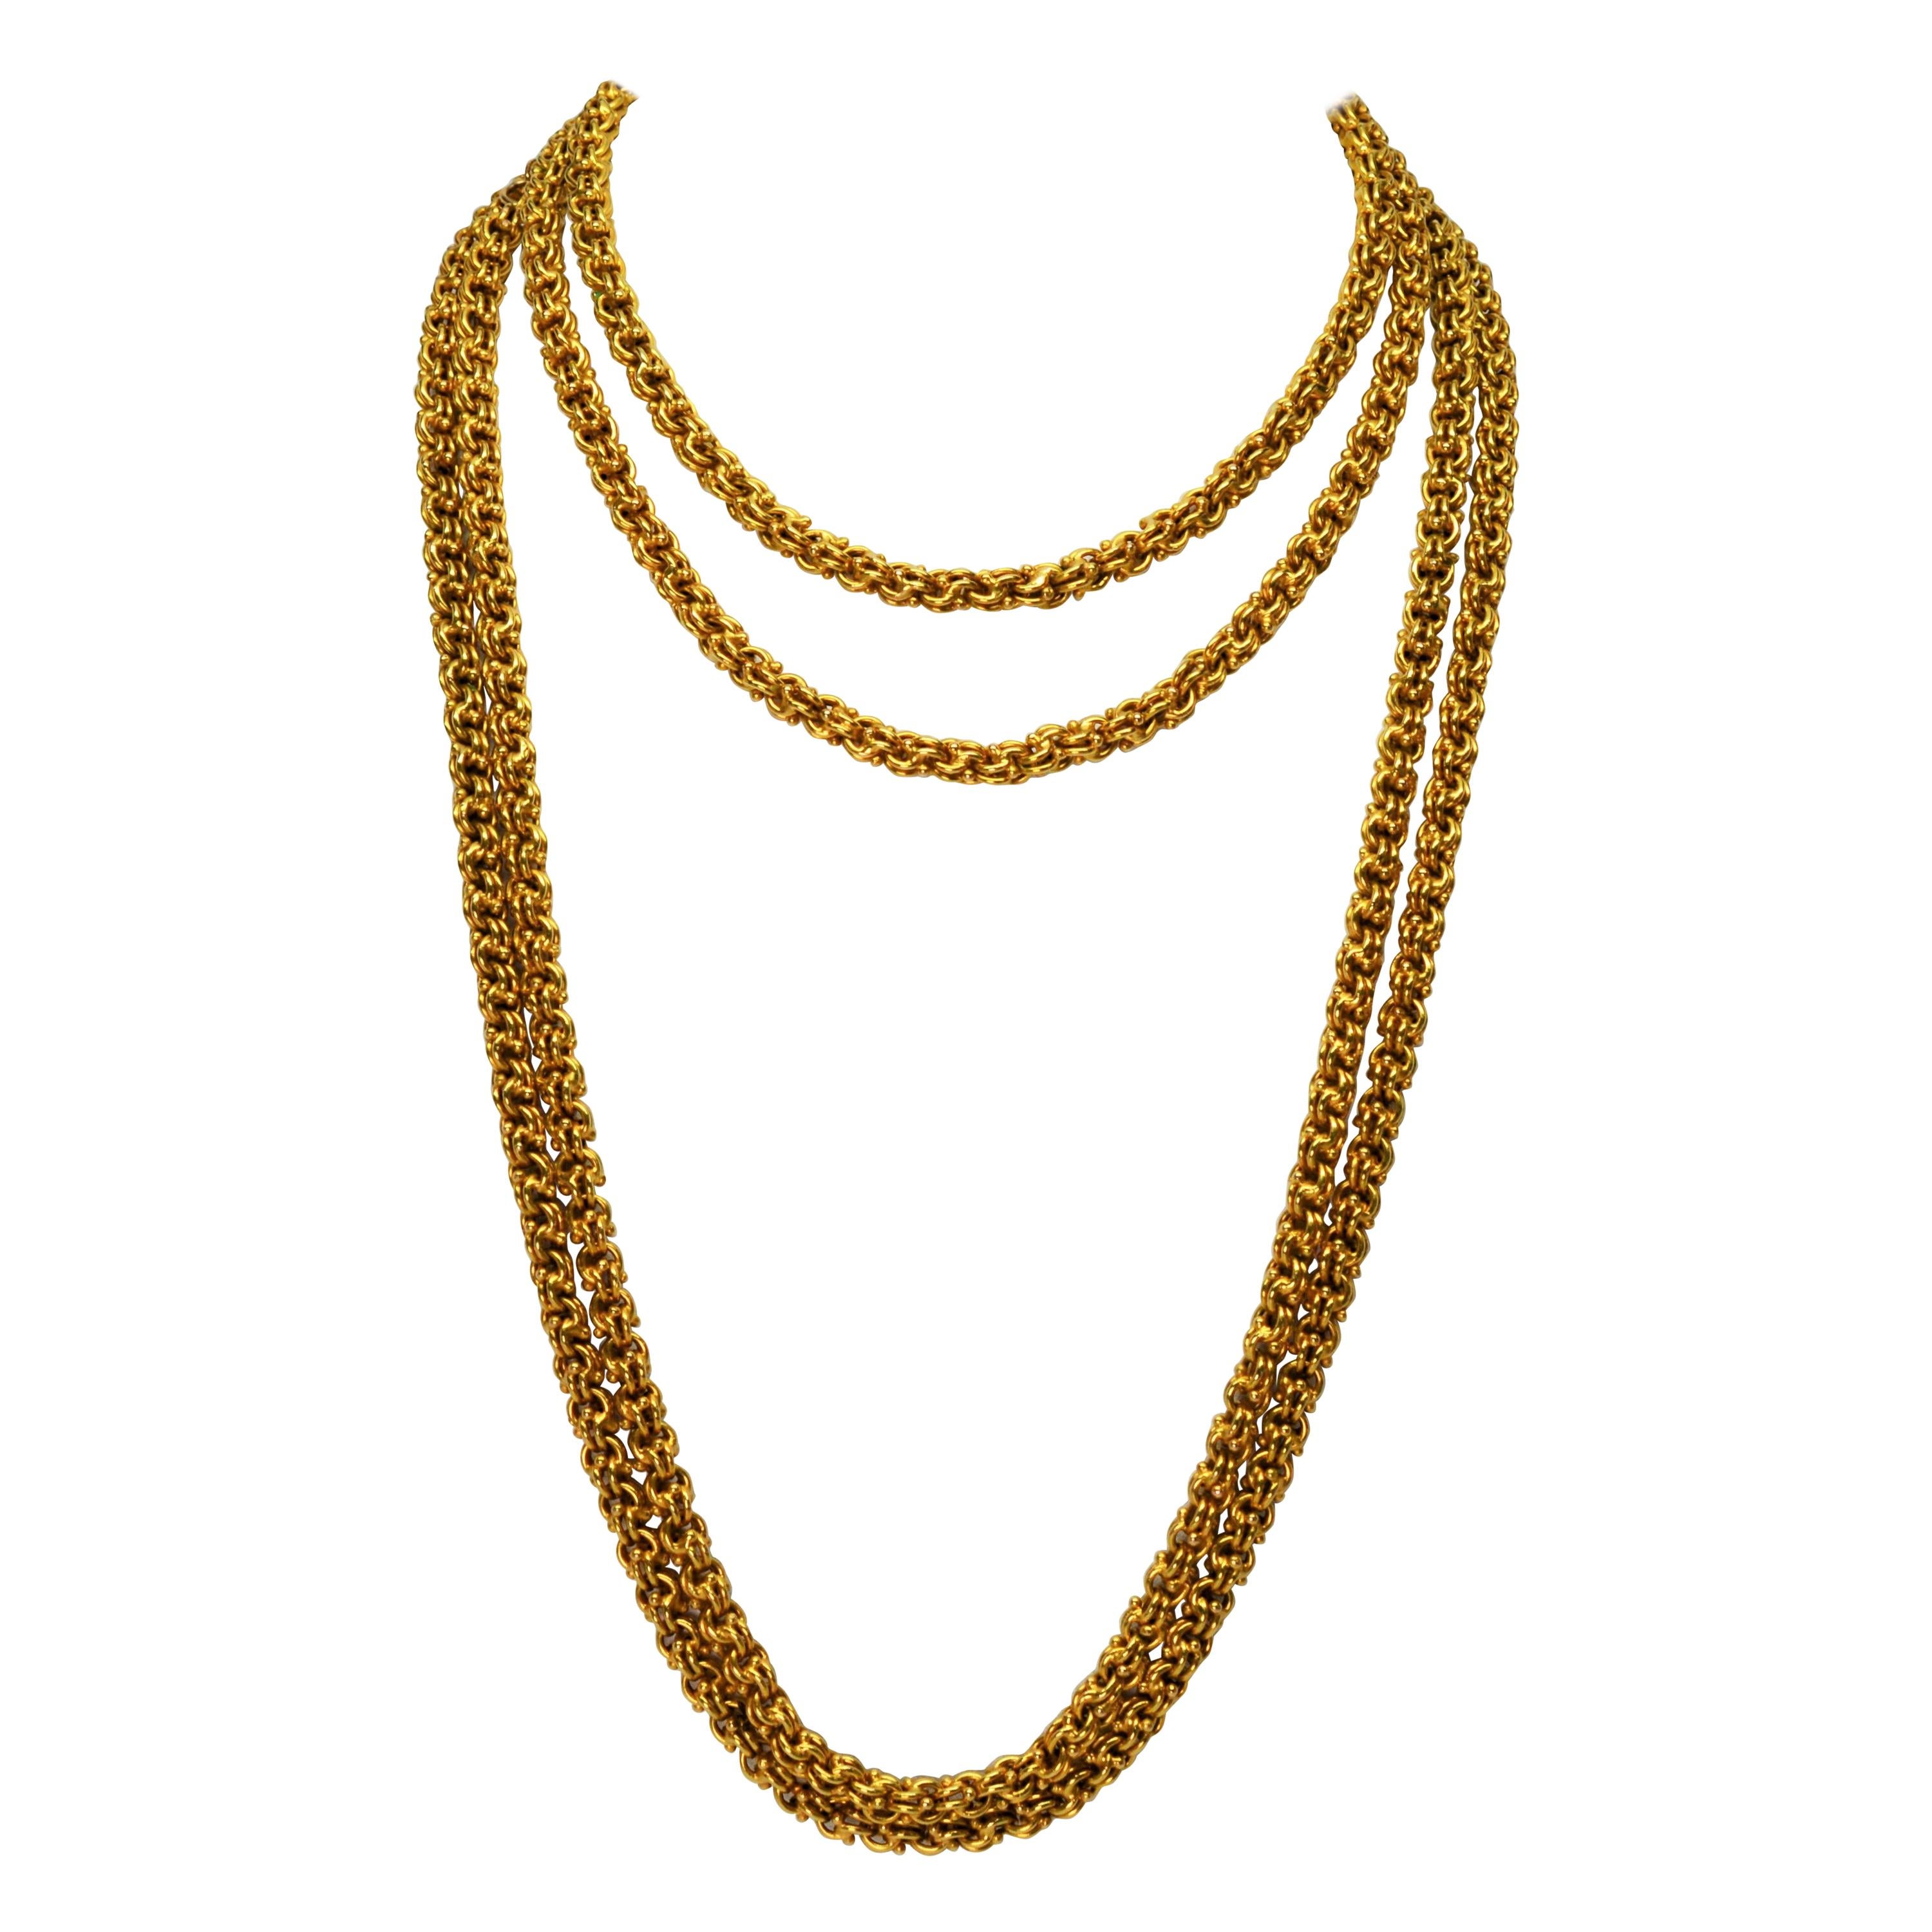 Antique Handmade Long Yellow Gold Double Cable Chain